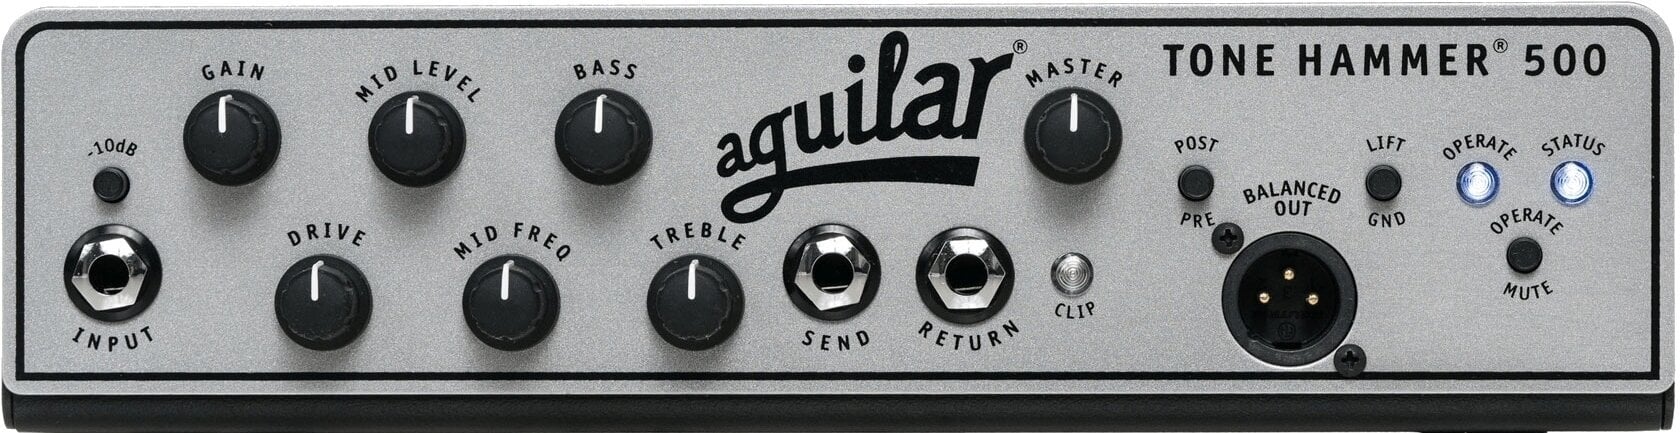 Solid-State Bass Amplifier Aguilar Tone Hammer 500